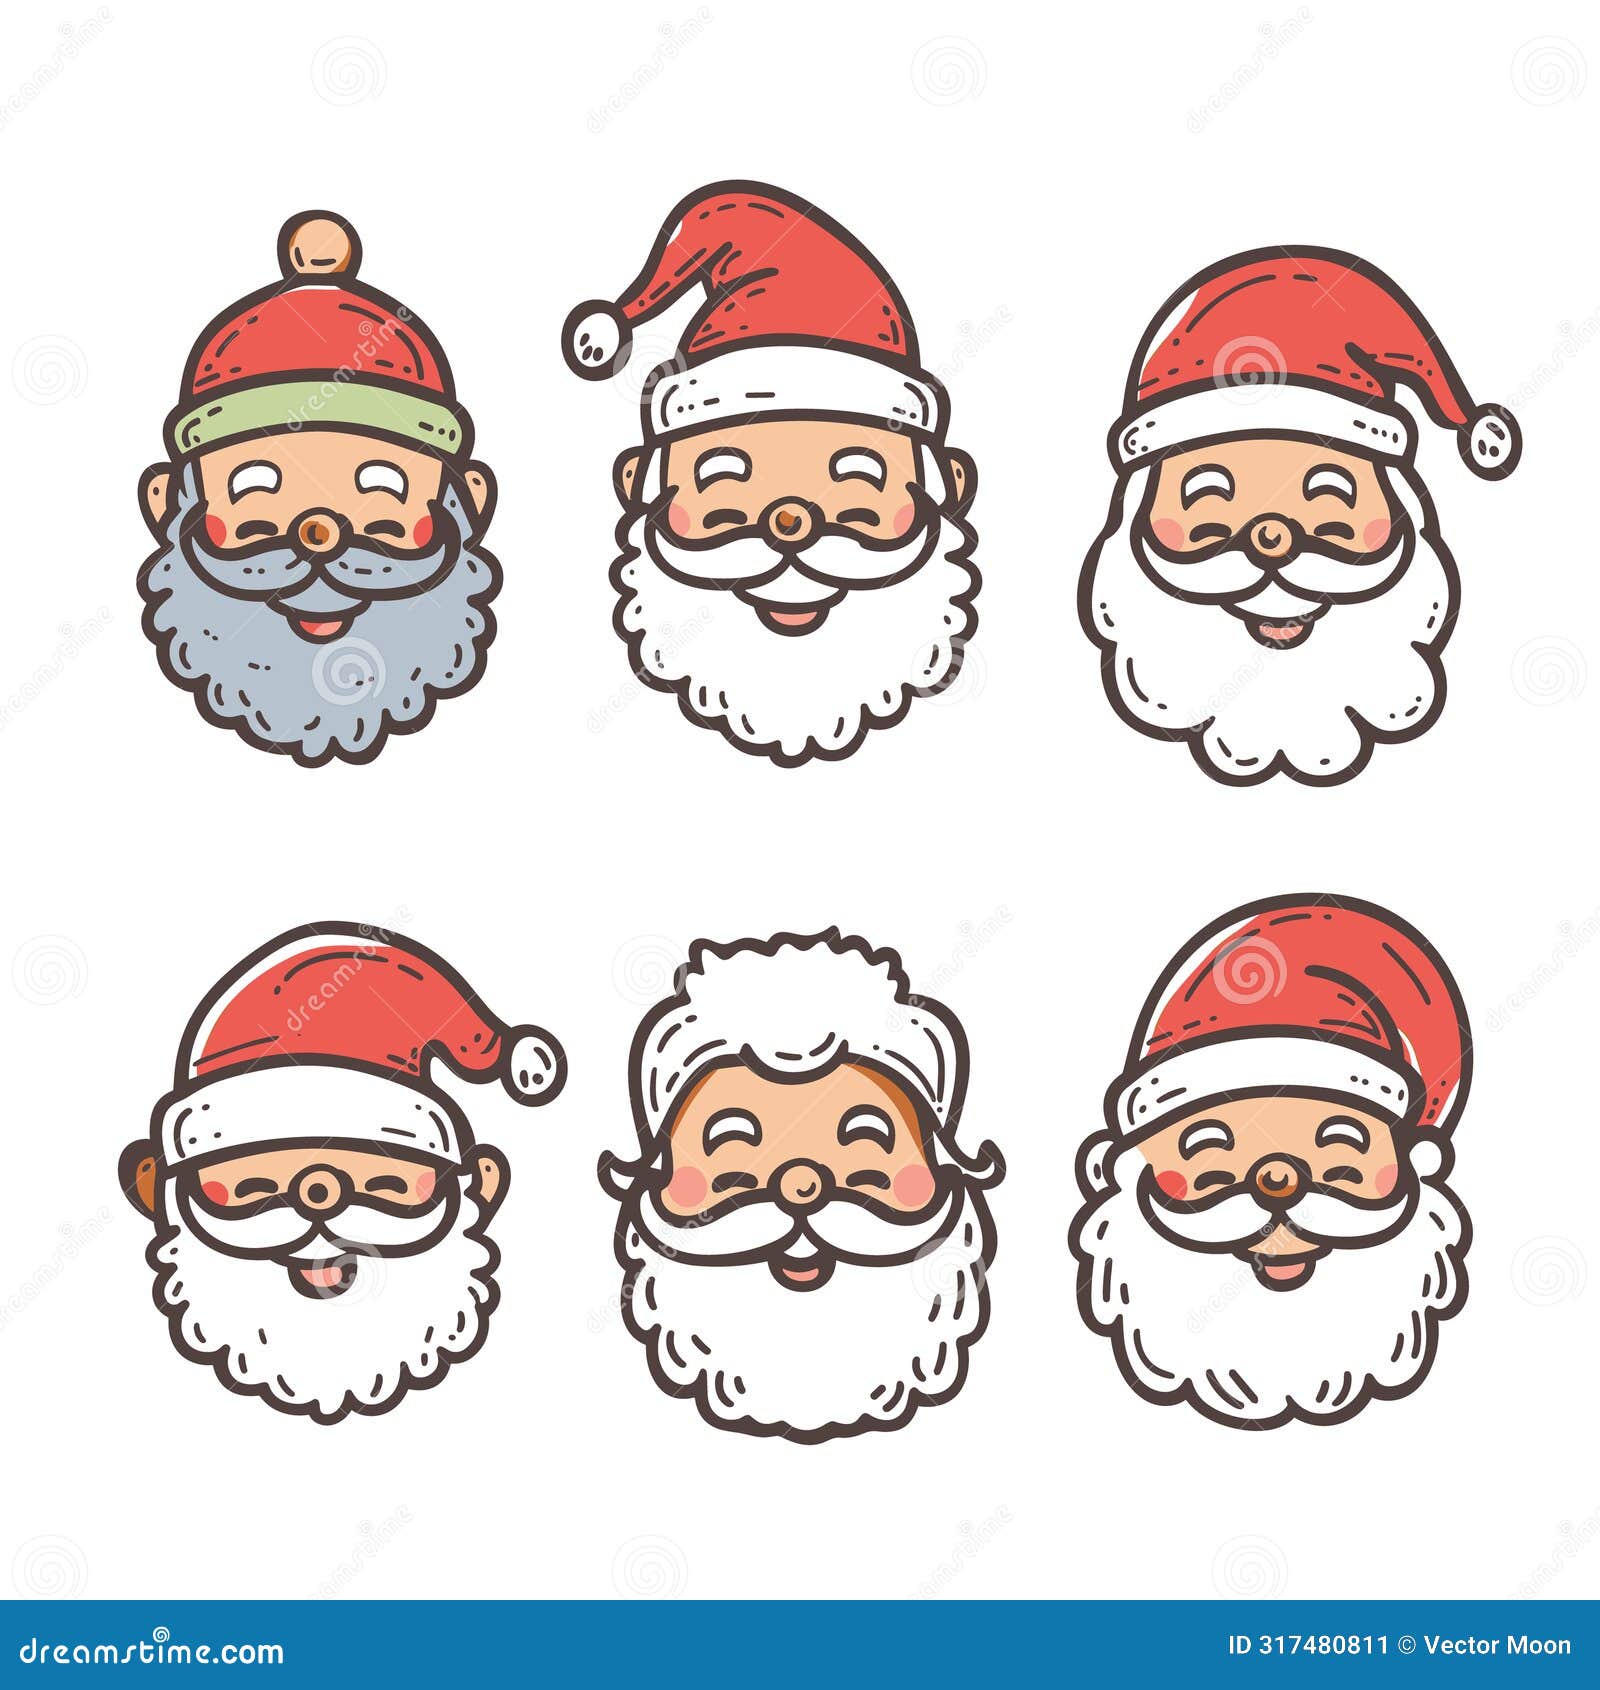 six santa claus faces expressing different jovial emotions, all wear festive hats, glasses